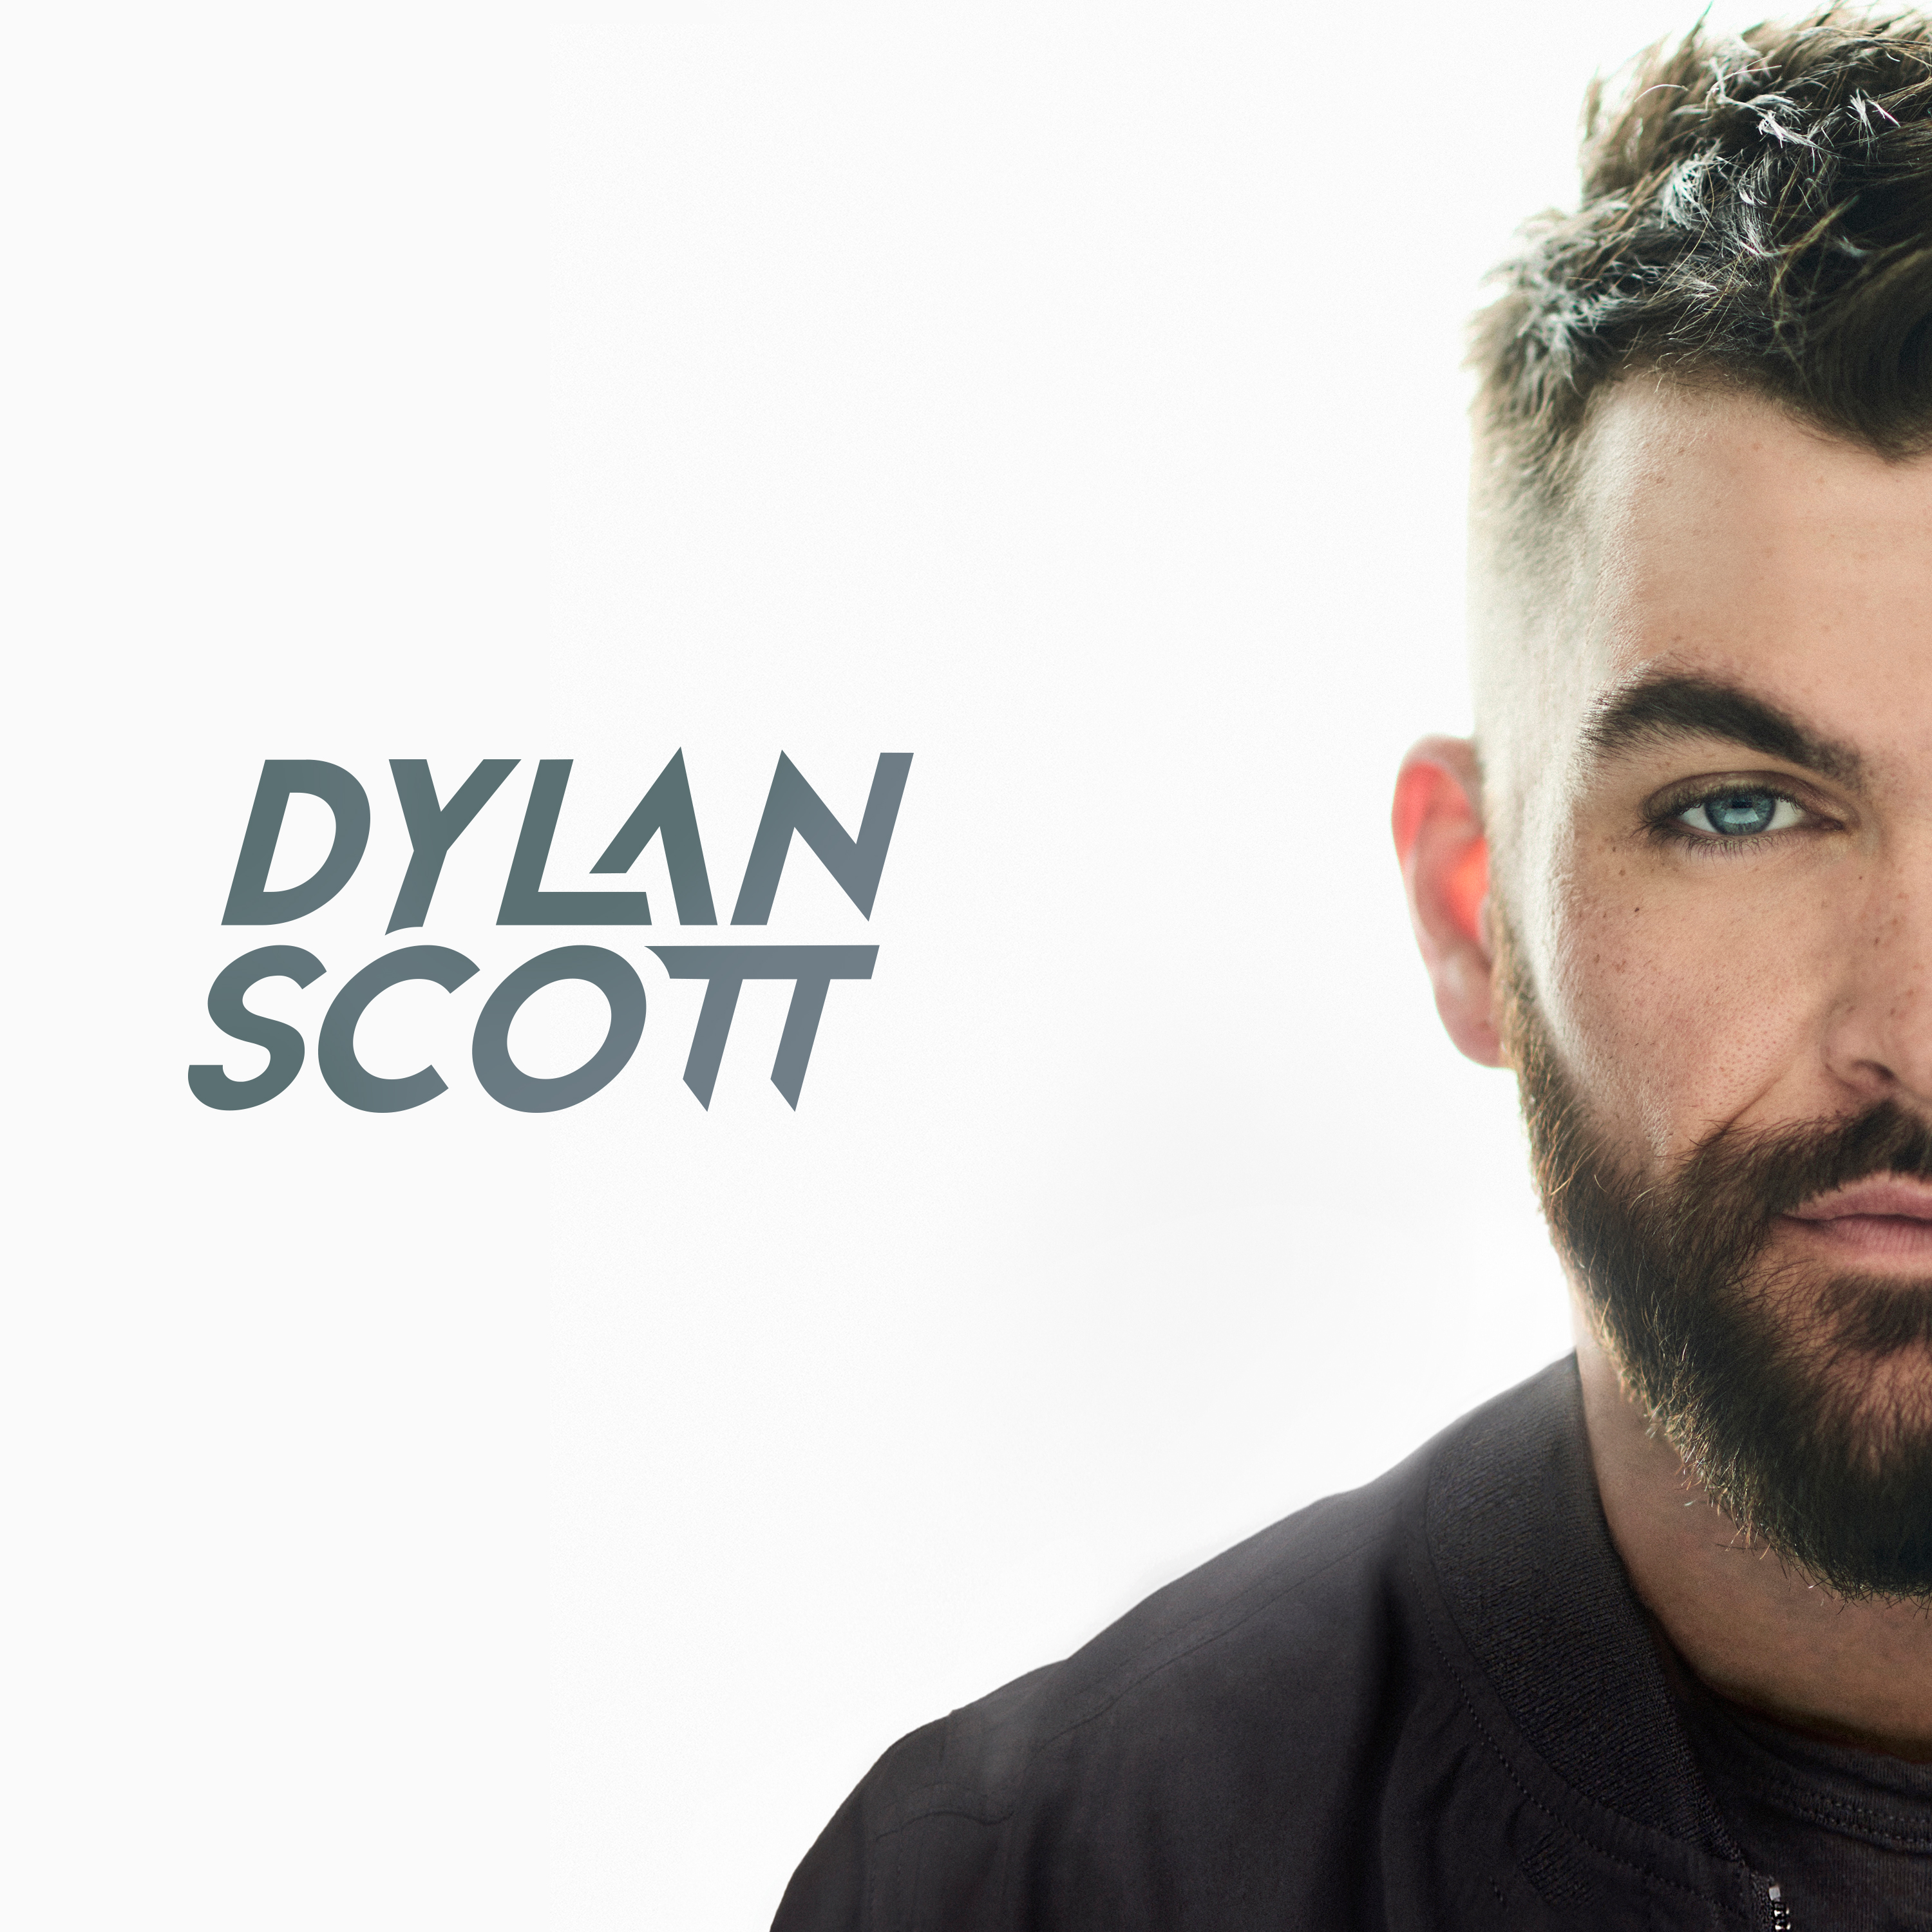 Dylan Scott builds on his breakout success with Nothing To Do Town, new